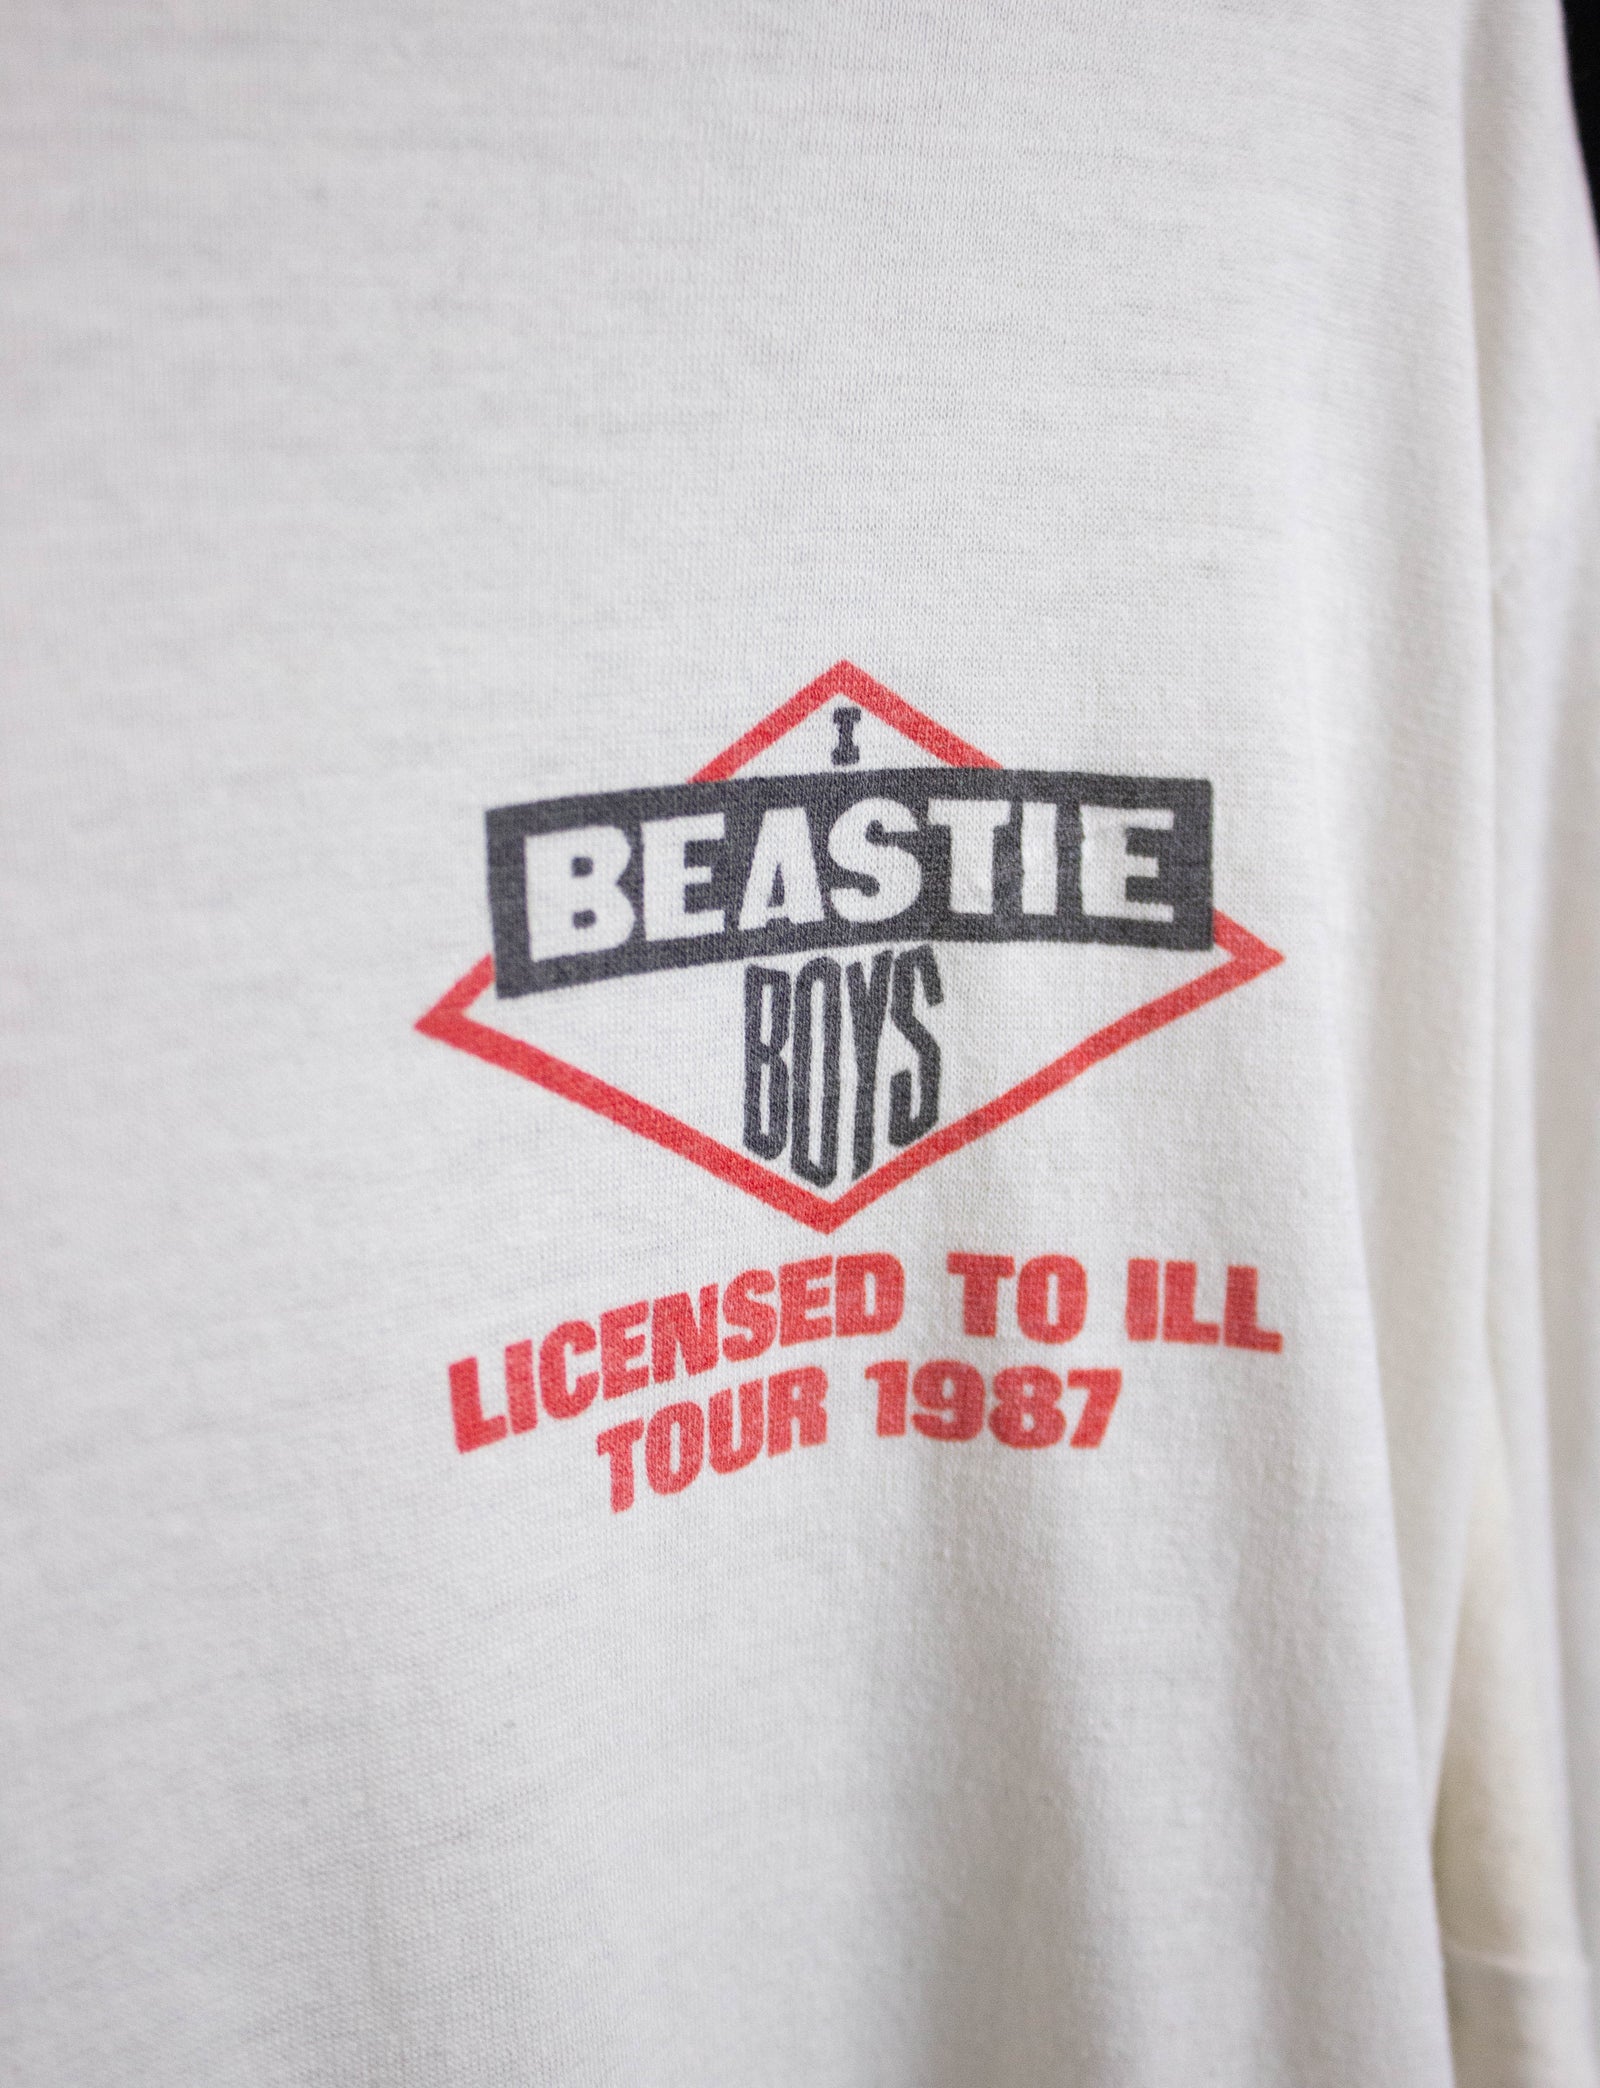 Vintage 1987 Beastie Boys Licensed To Ill Long Sleeve Concert T 